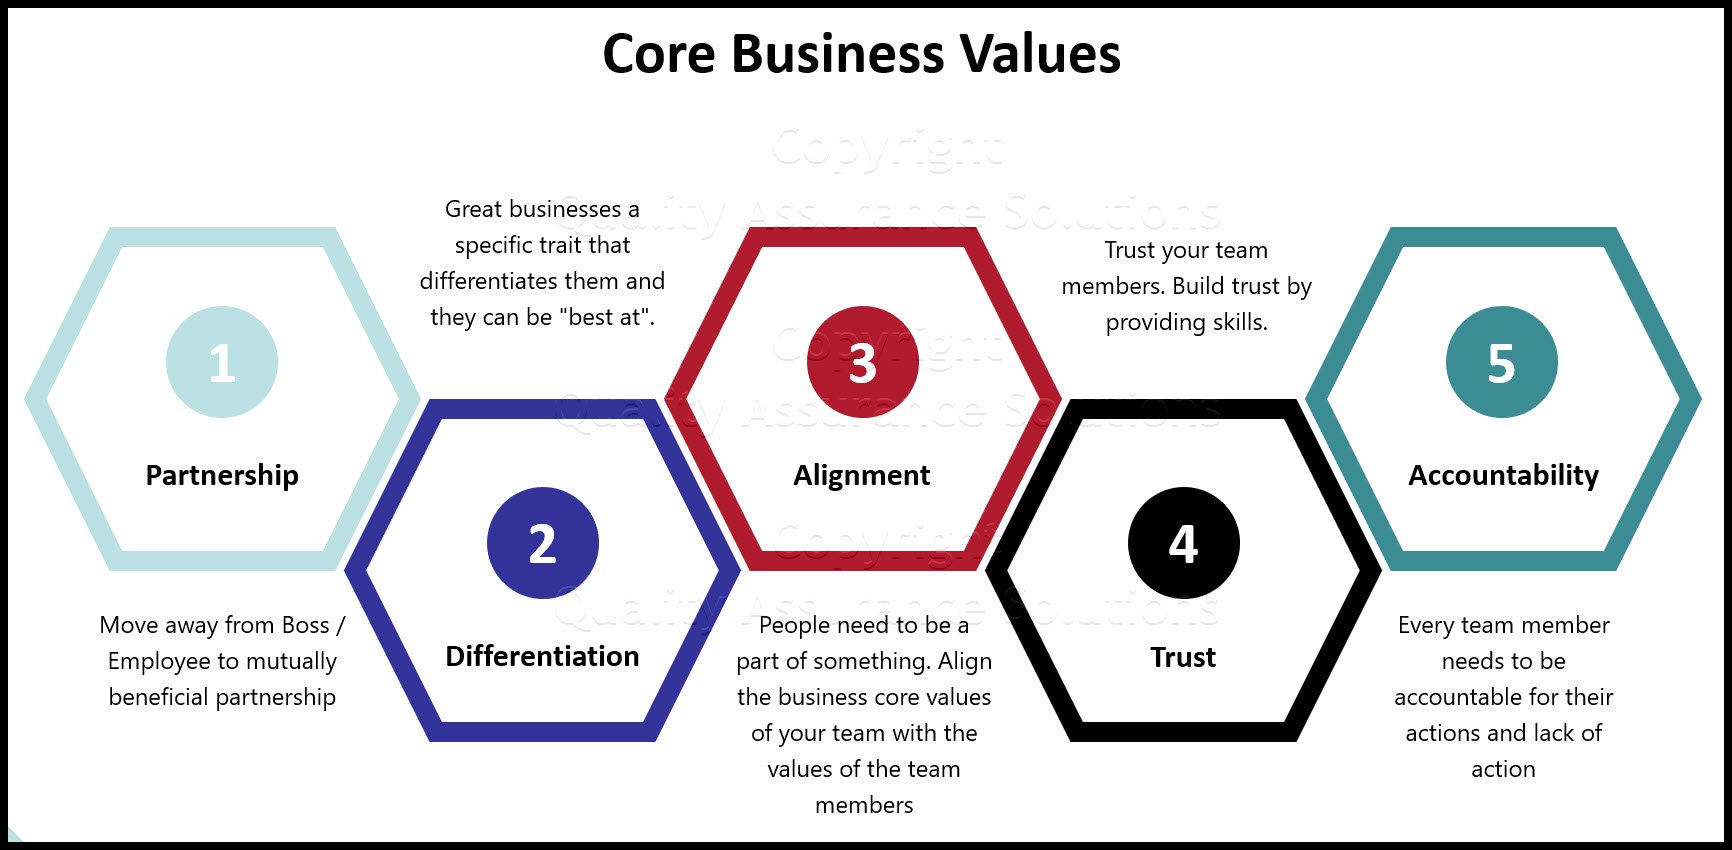 Your business core values determine the mission and the trajectory of your team and organization.